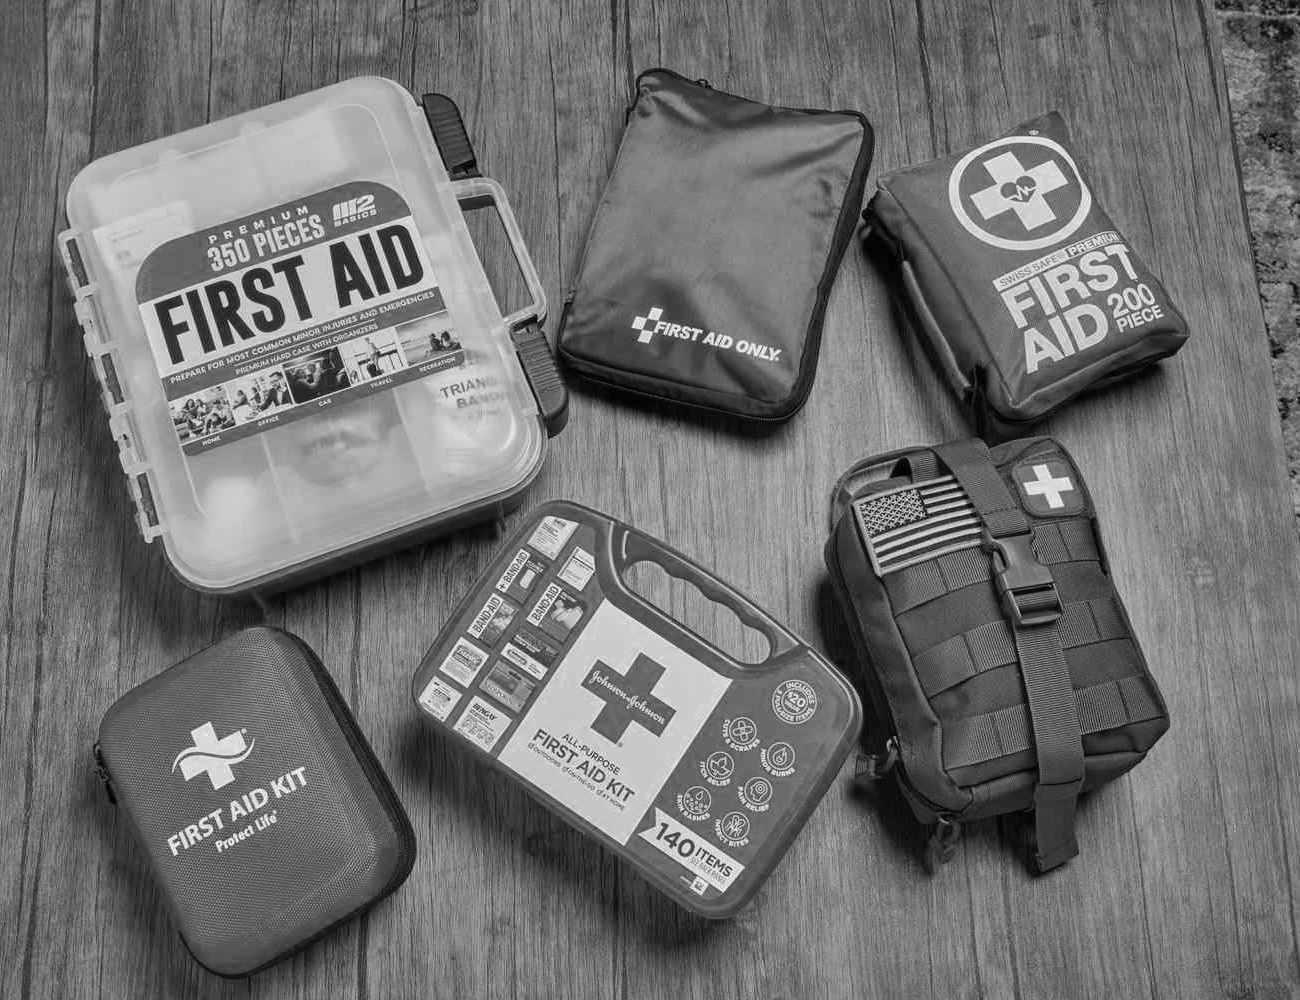 Bags of First Aid Kit